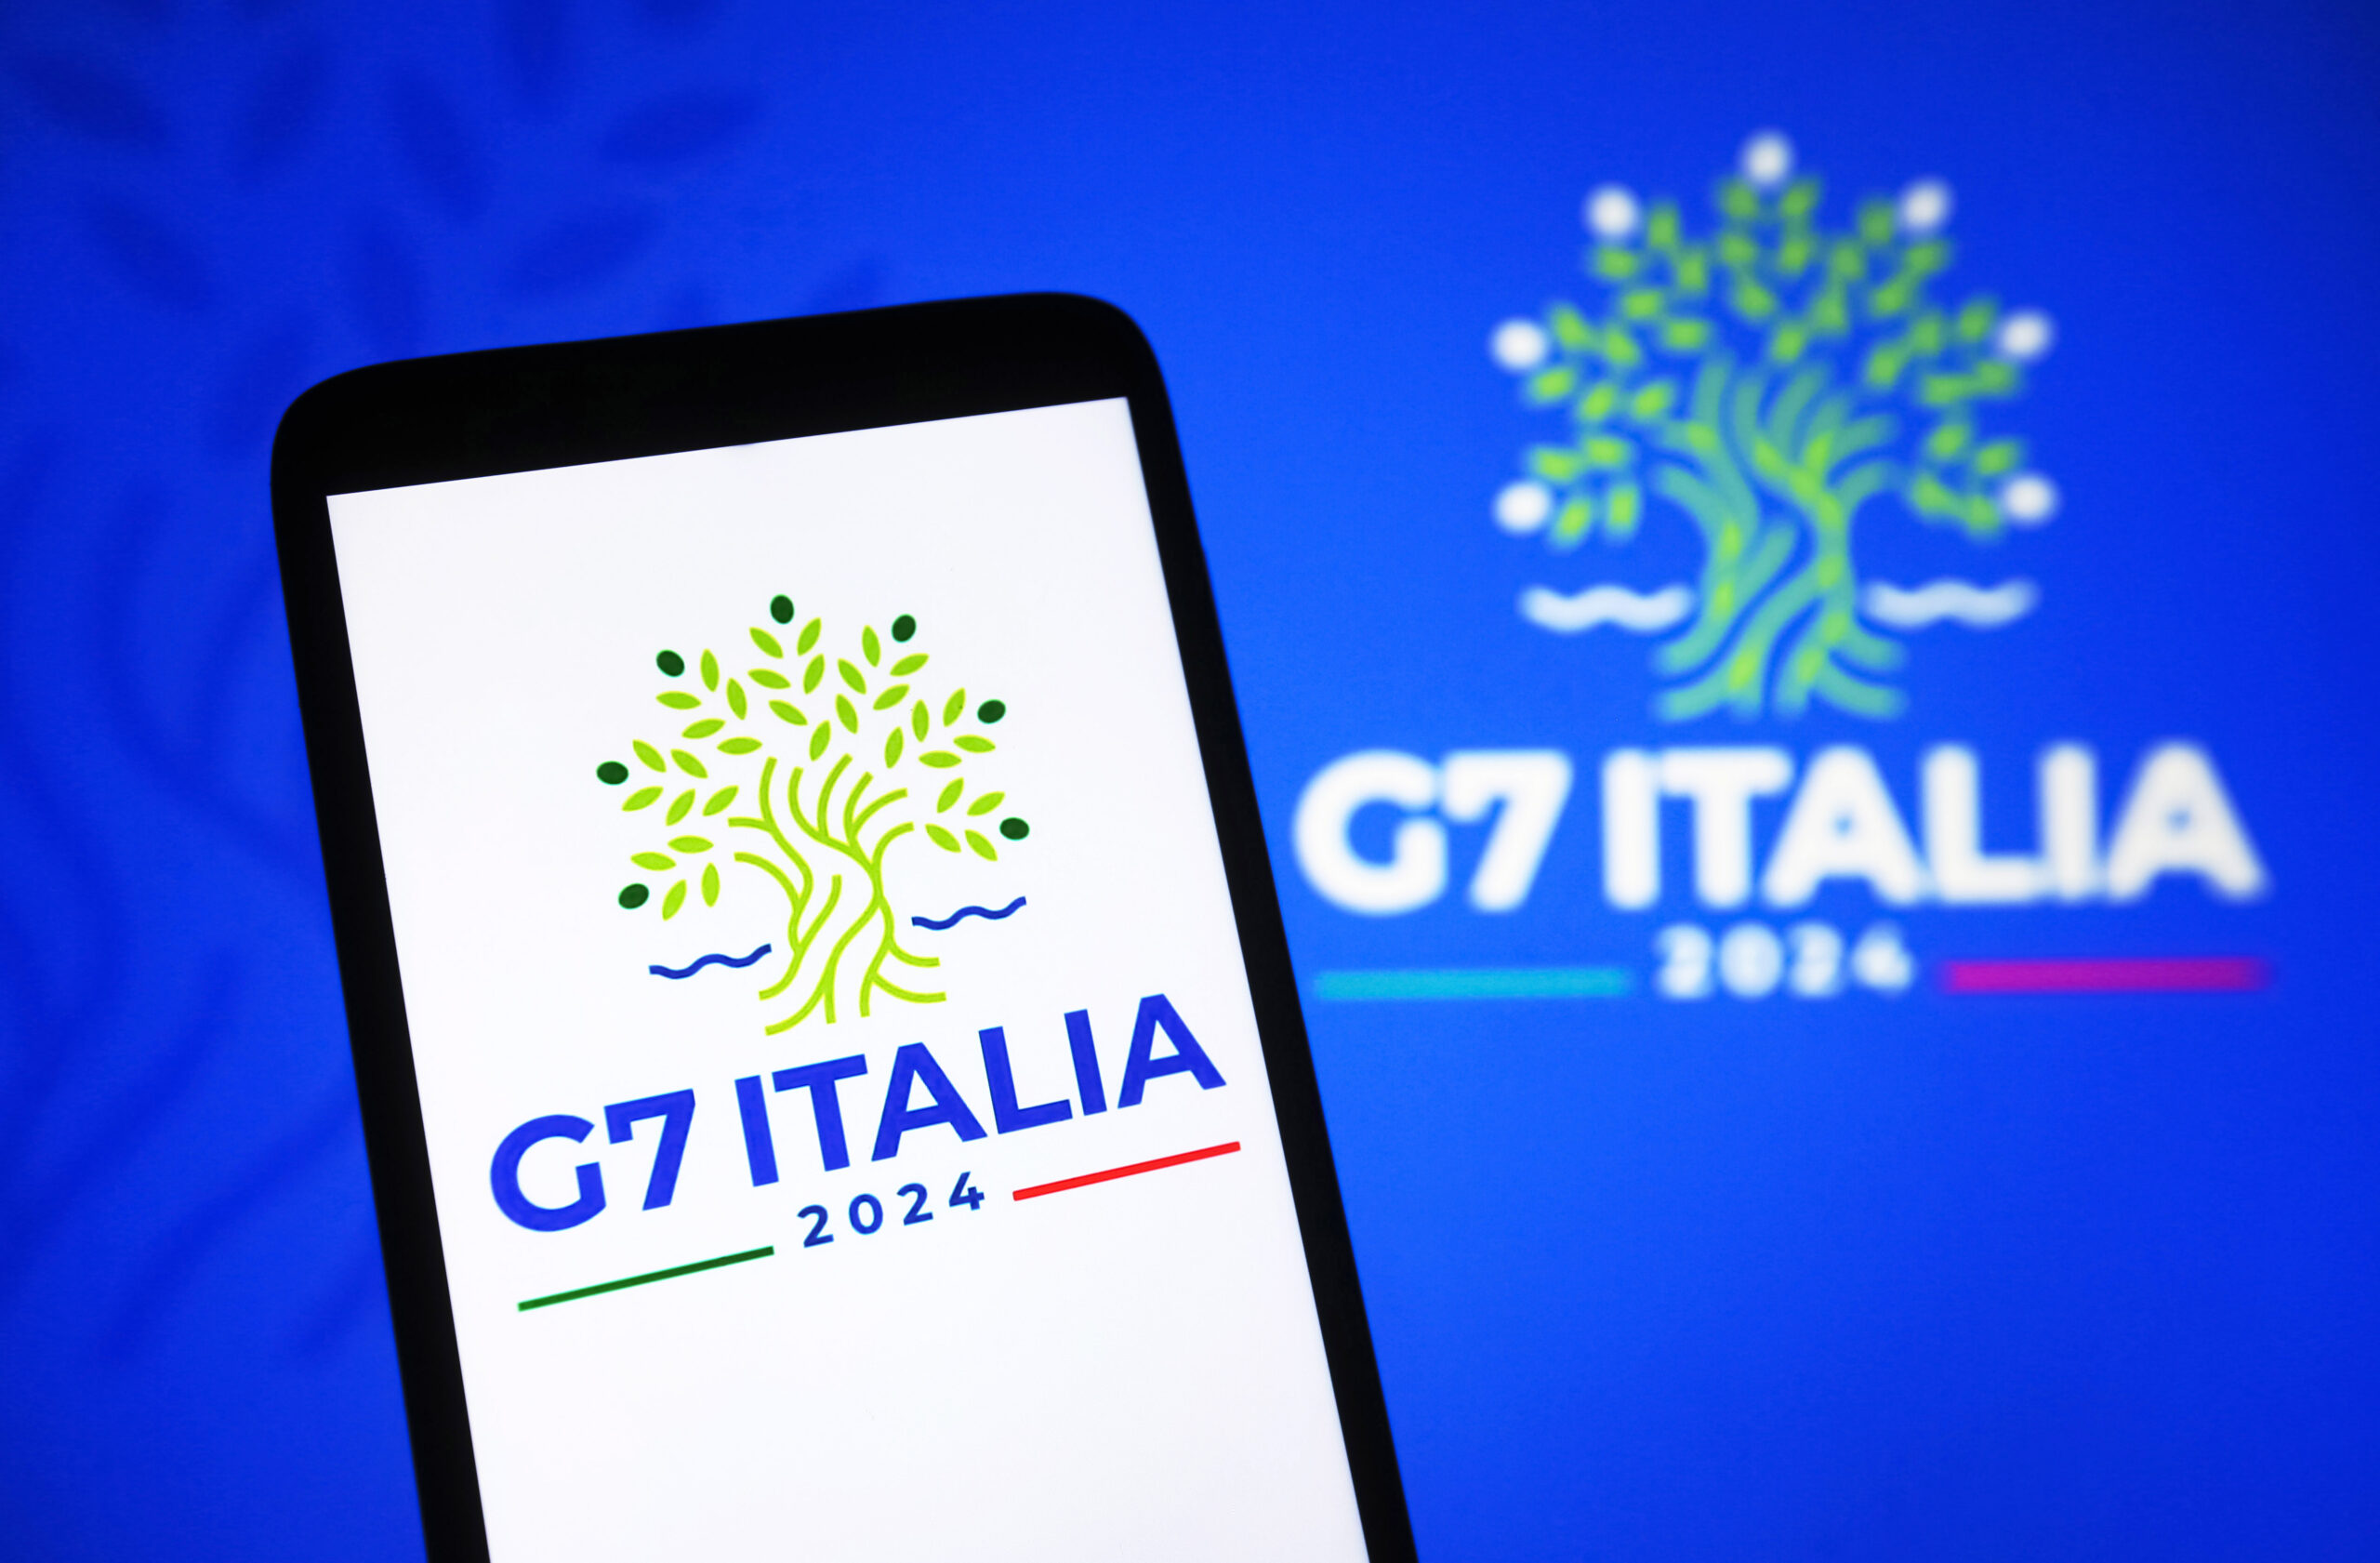 In this photo illustration, the 50th G7 2024 summit logo of the Group of Seven is seen on a smartphone and a pc screen. The 50th G7 summit is scheduled to take place from 13 to 15 June 2024 in Italy. (Photo by Pavlo Gonchar / SOPA Images/Sipa USA)  No Use Germany.